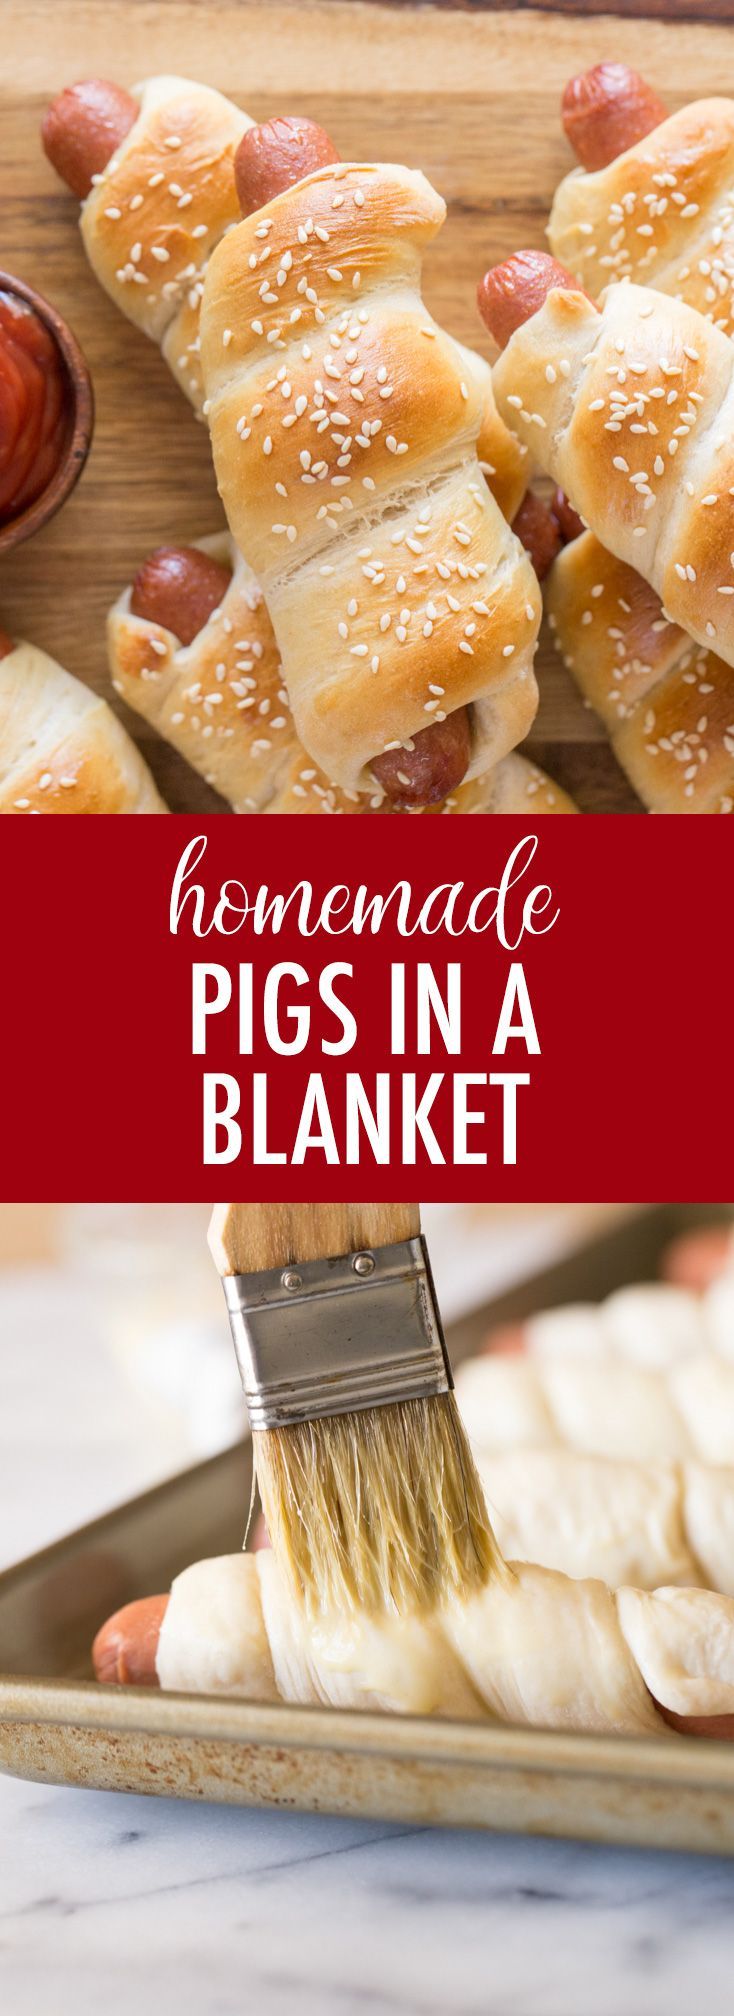 These Homemade Pigs in a Blanket are the perfect summer lunch for your kiddos! You can make your own dough, or use a store-bought pizza dough. -   22 home made pizza recipes
 ideas